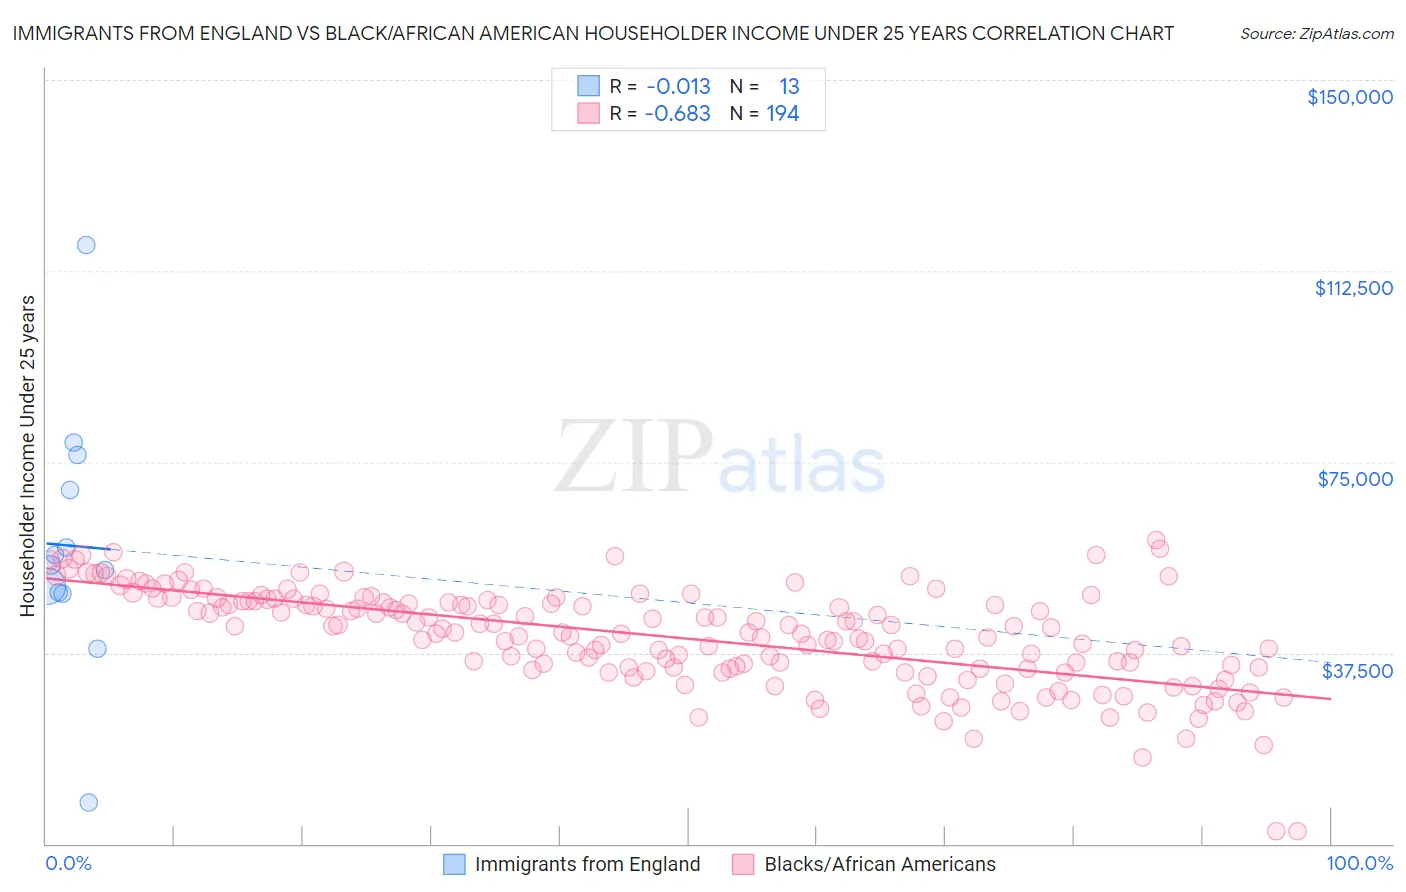 Immigrants from England vs Black/African American Householder Income Under 25 years